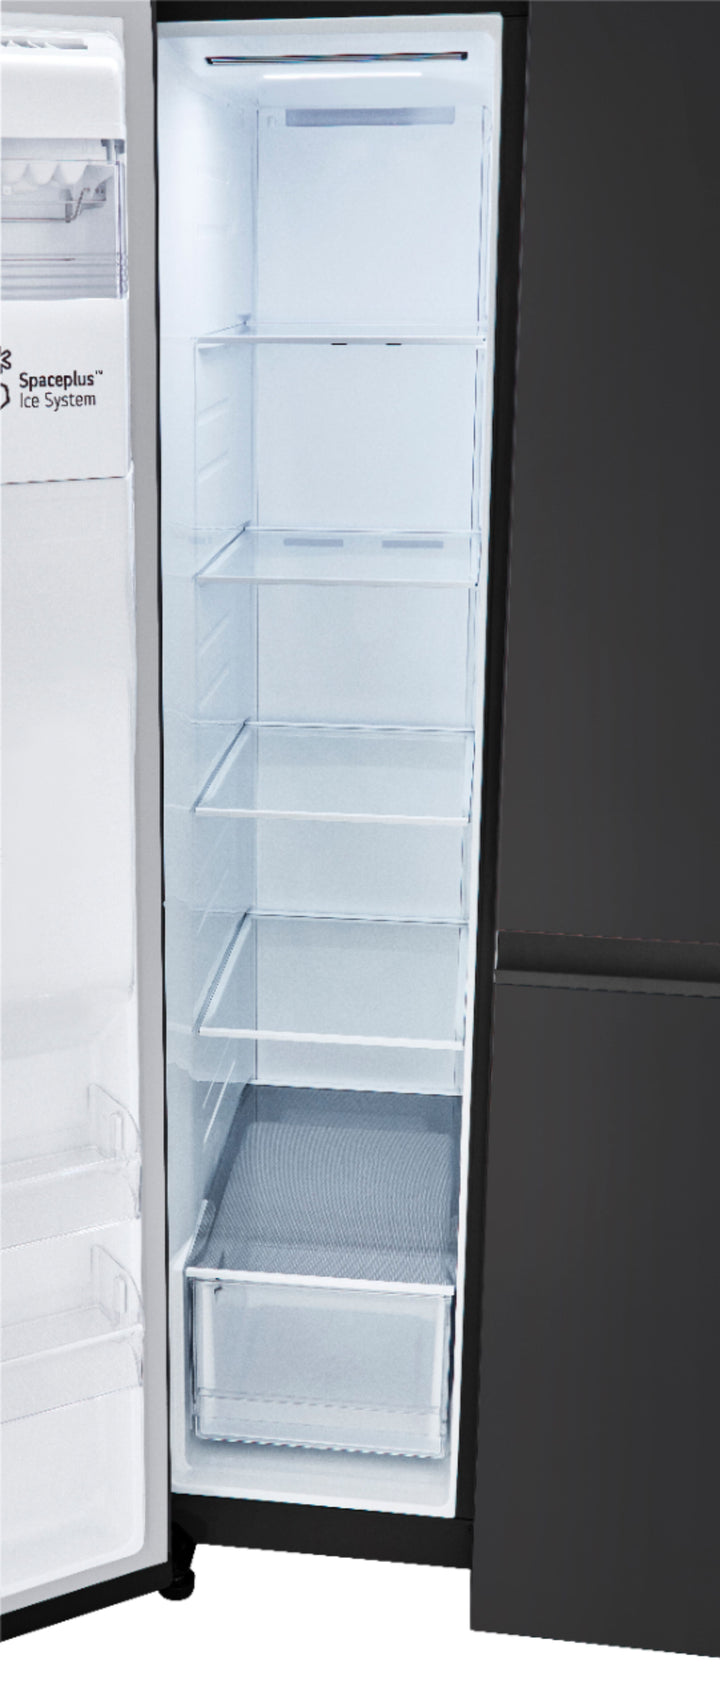 LG - 27.2 cu ft Side by Side Refrigerator with SpacePlus Ice - Smooth black_16